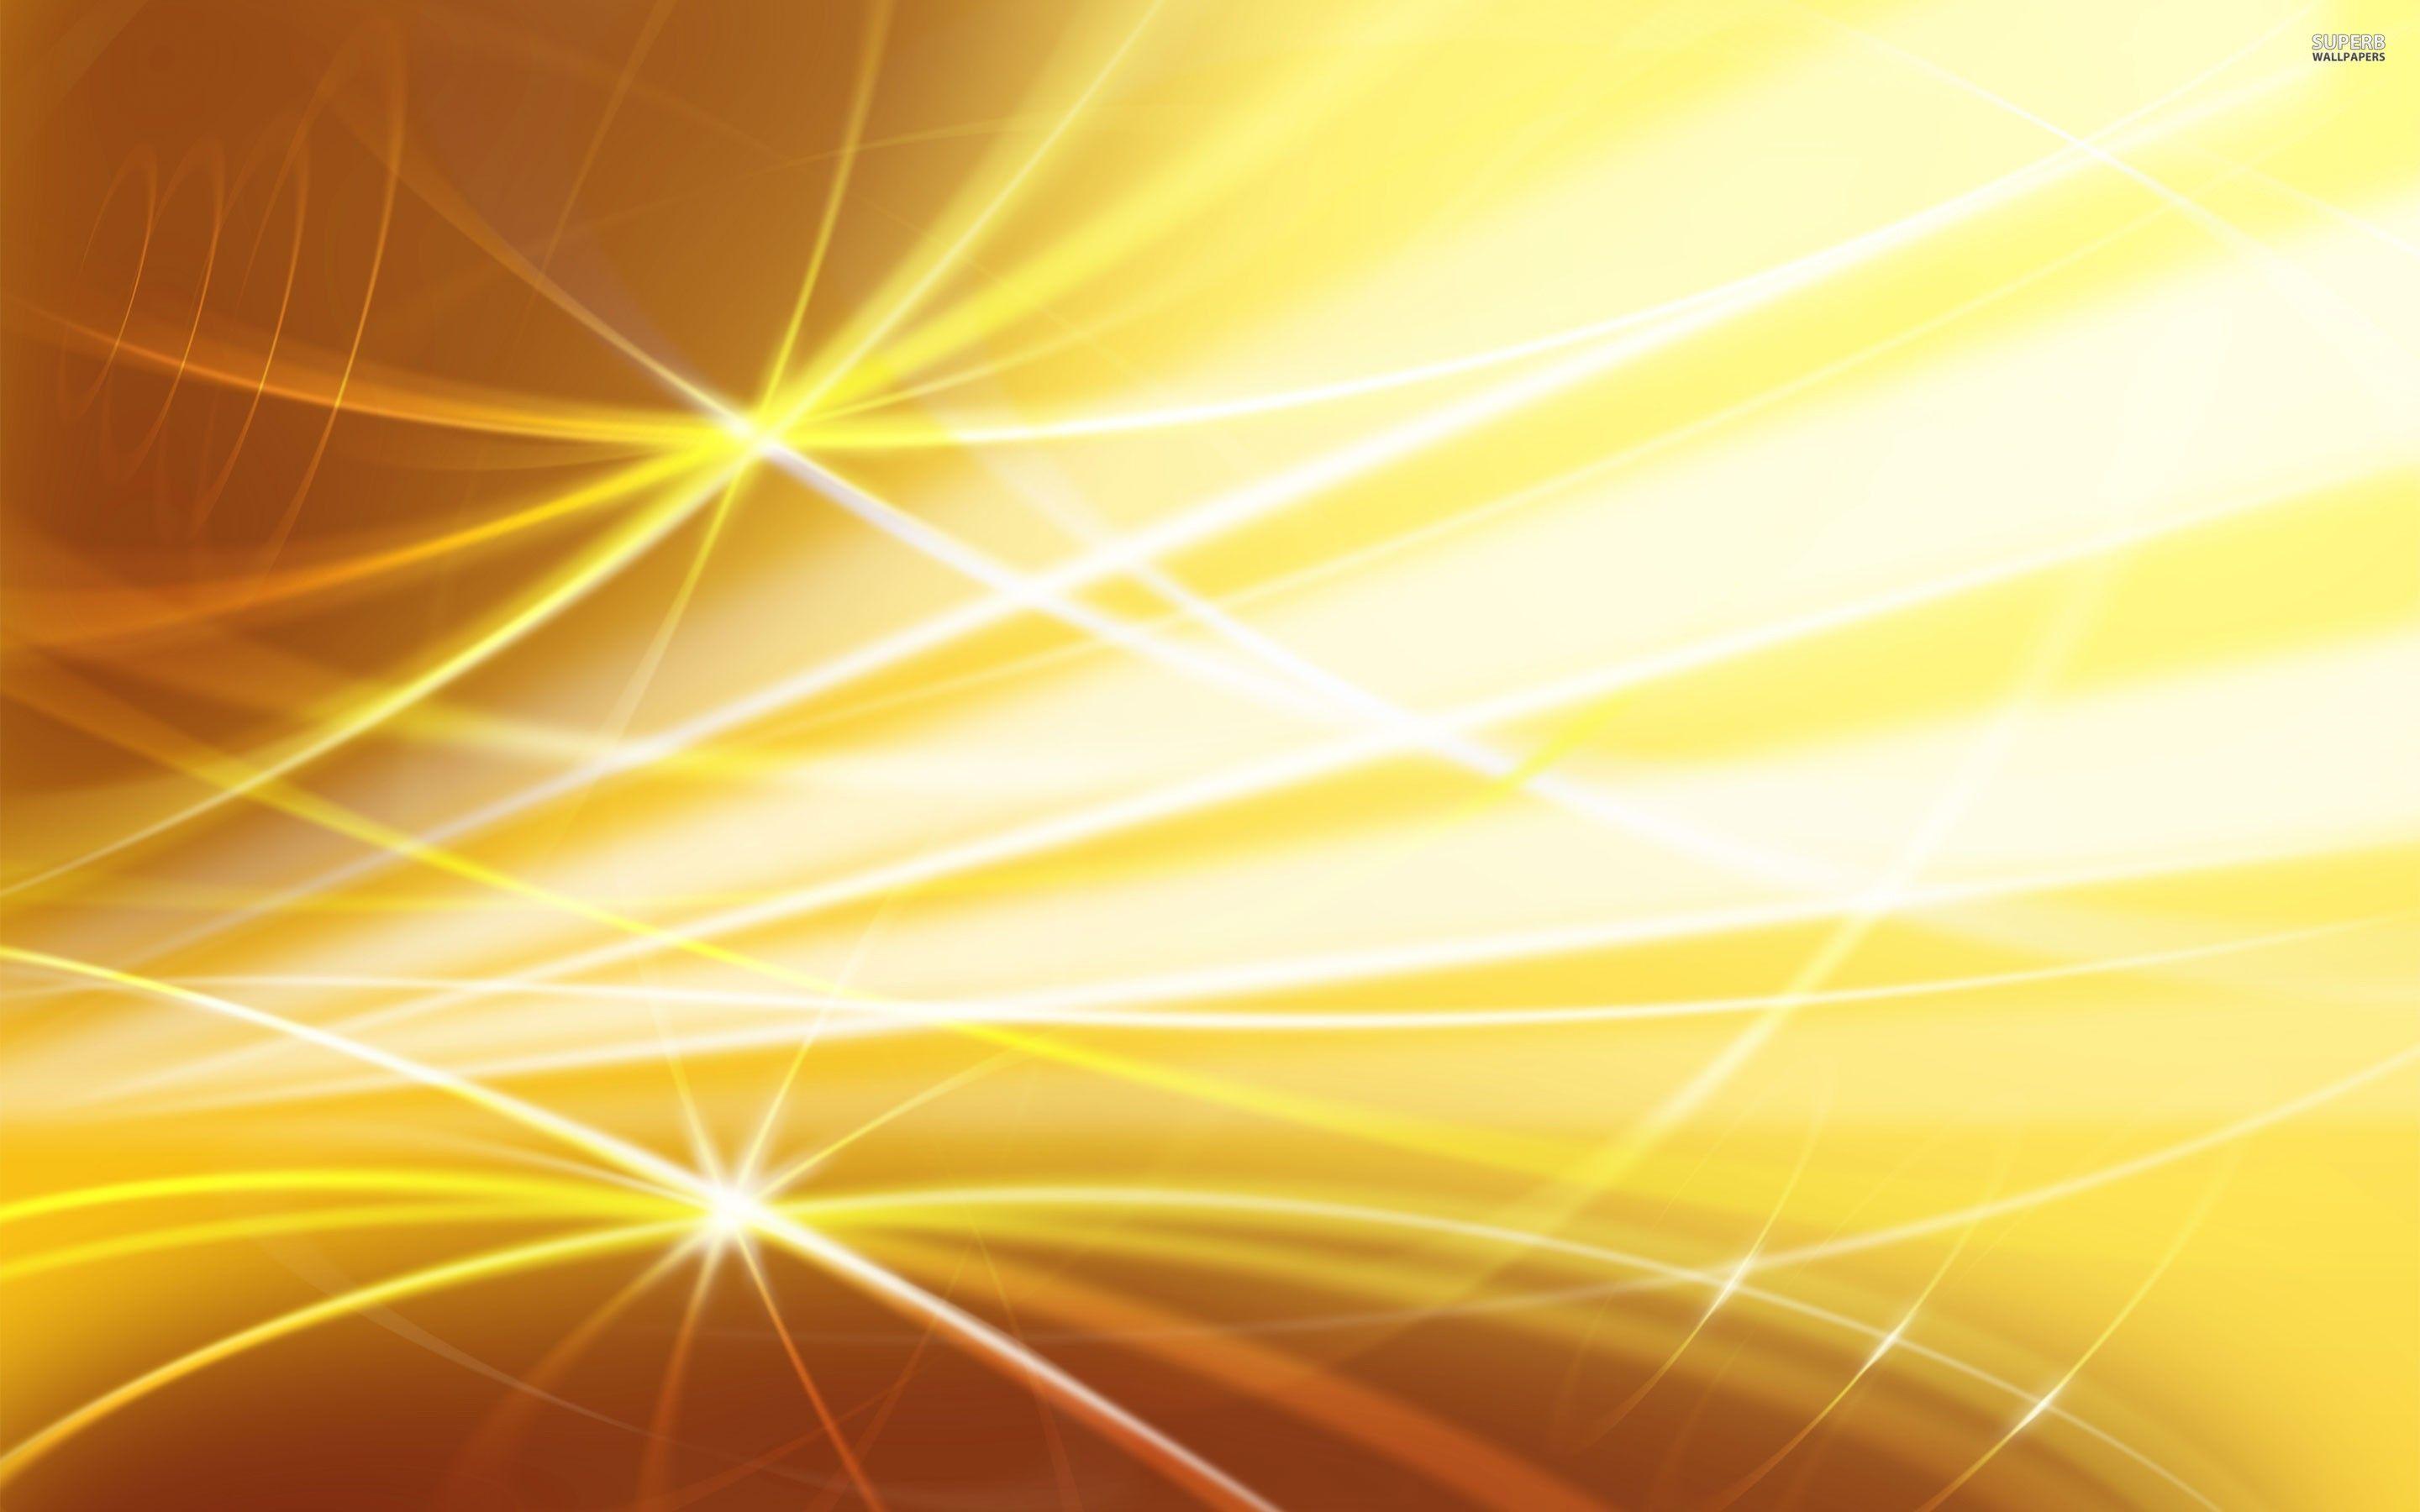 Wallpaper Of The Day: Golden